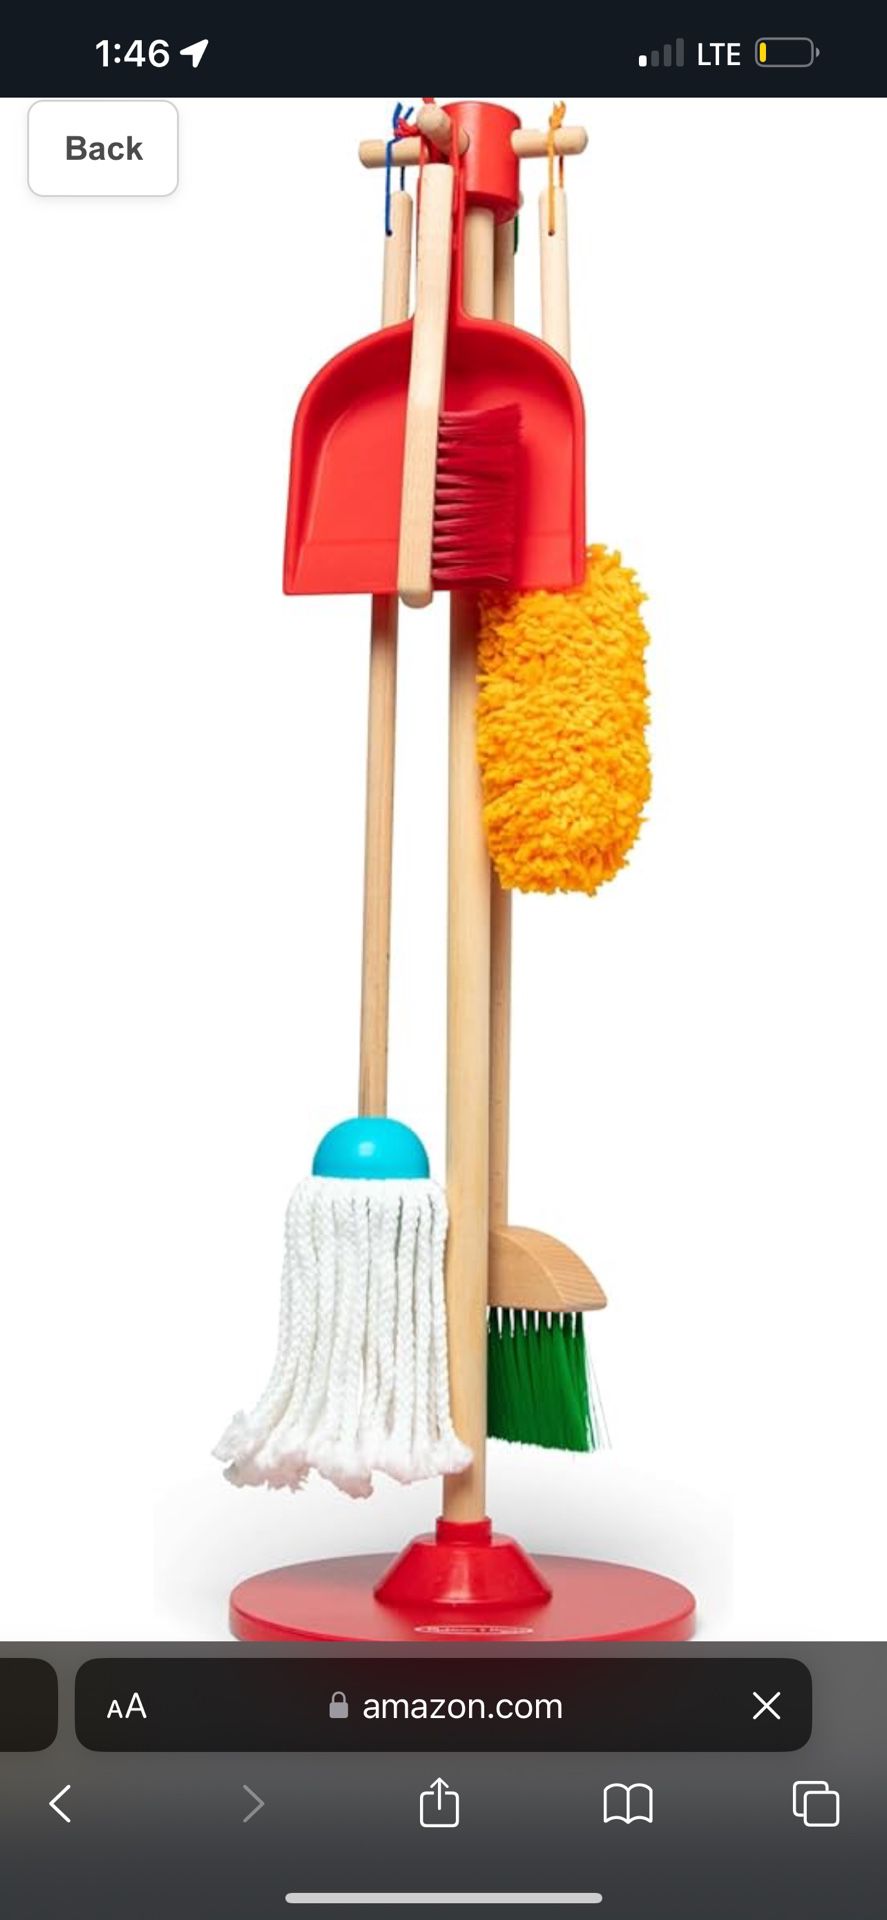 Melissa & Doug Let's Play House Dust! Sweep! Mop! 6 Piece Pretend Play Set - Toddler Toy Cleaning Set, Pretend Home Cleaning Play Set, Kids Broom